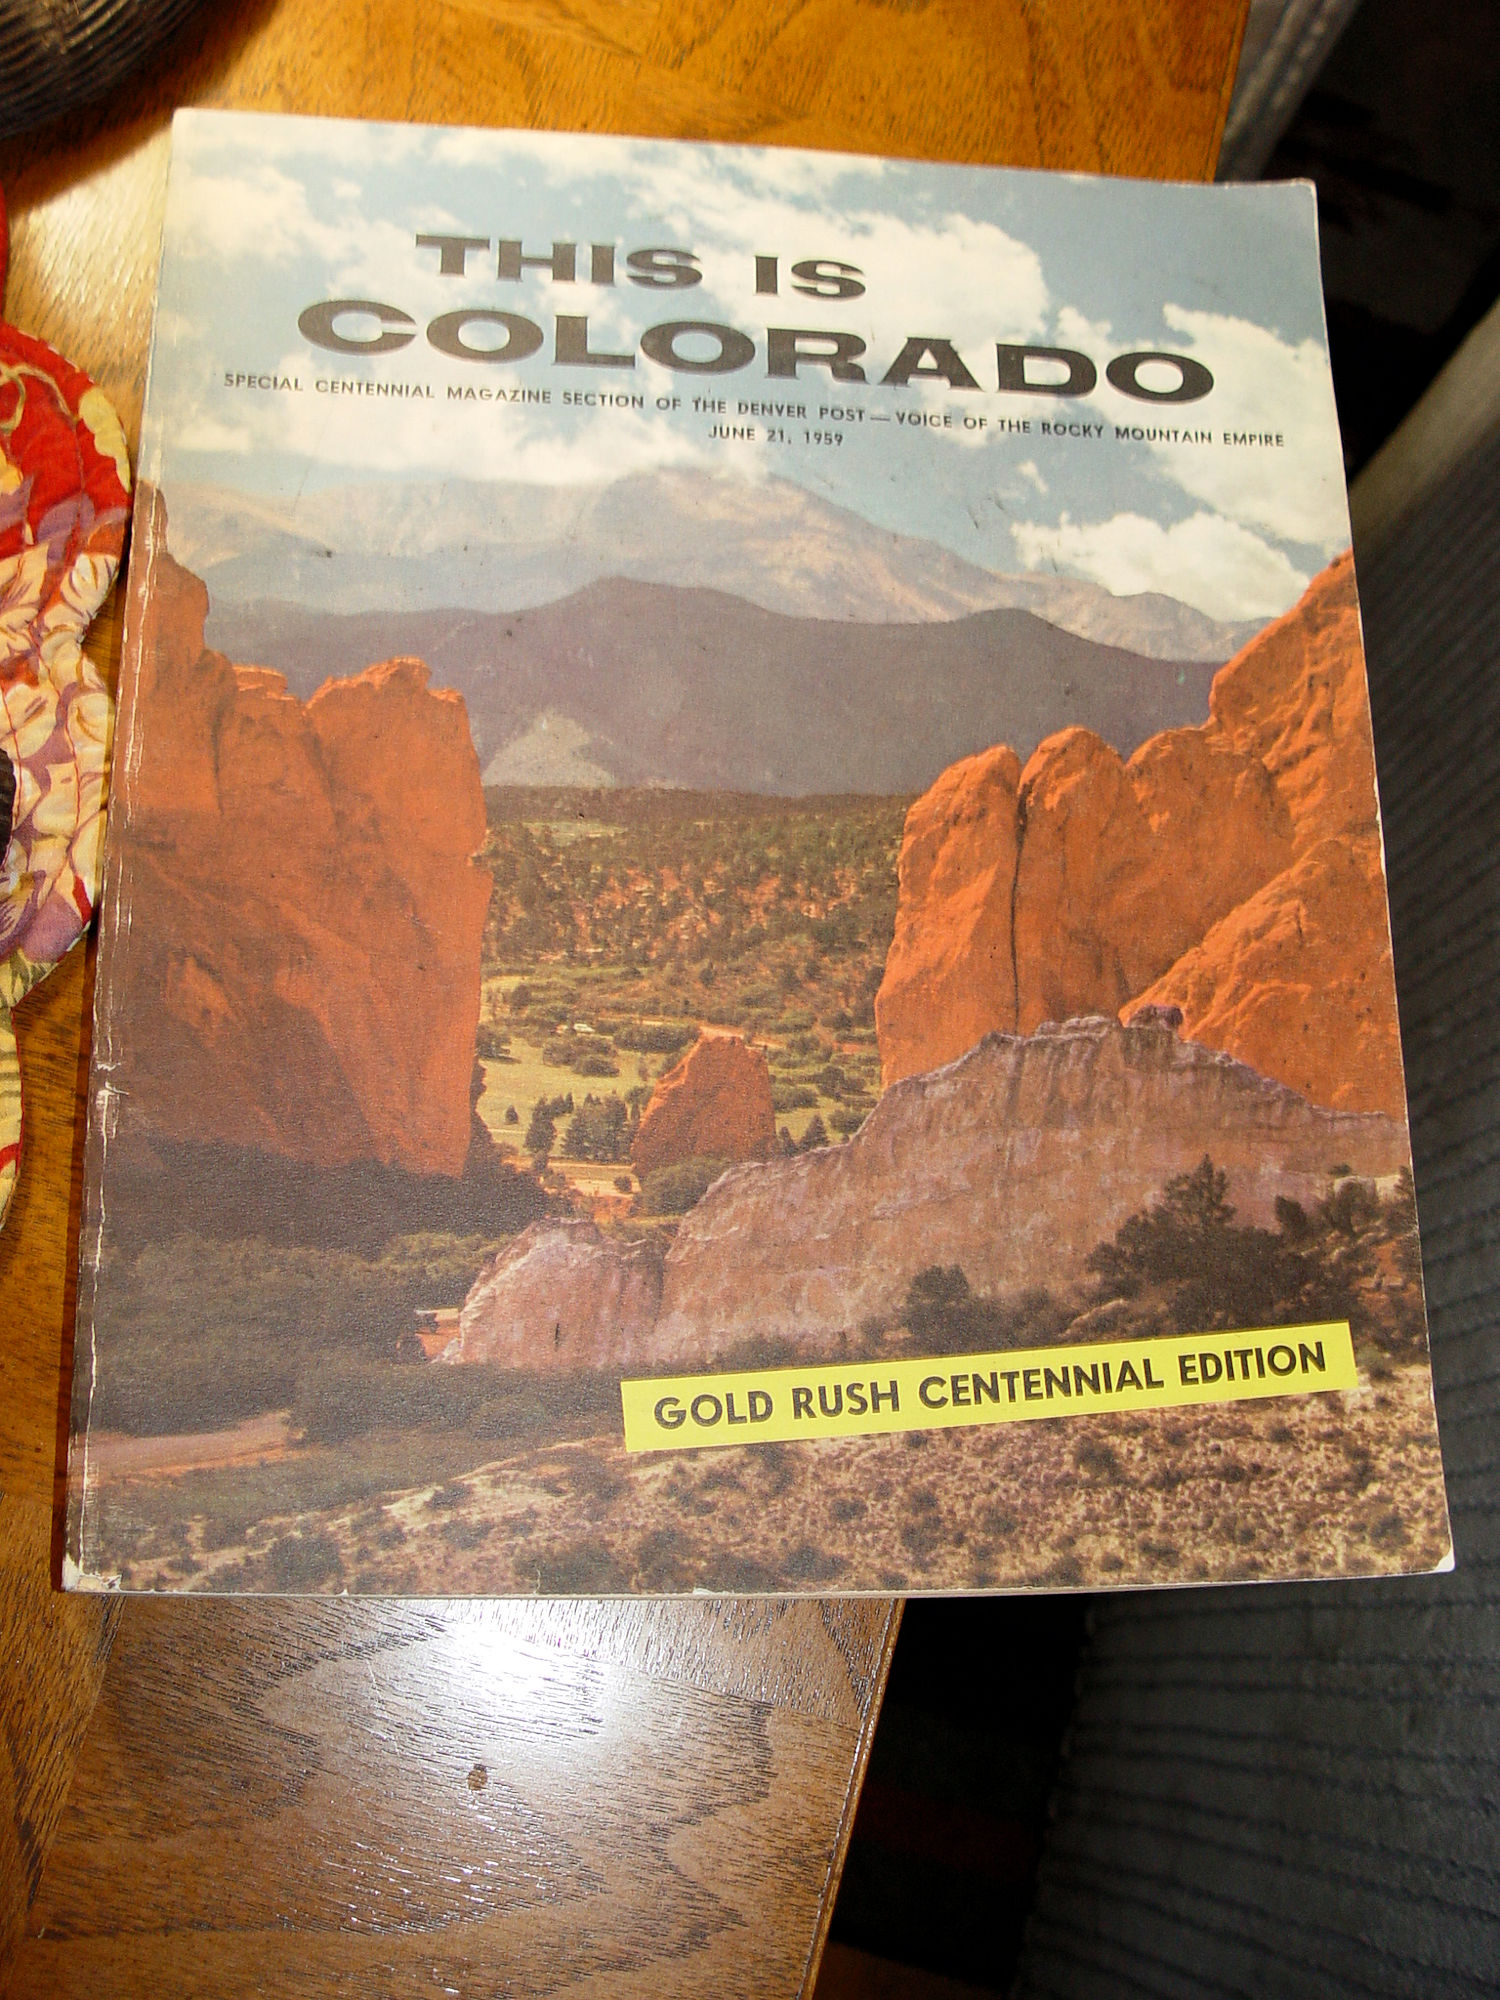 This Is
                        Colorado: 1959 Gold Rush Centennial Edition
                        (Special Magazine Section of the Denver Post)